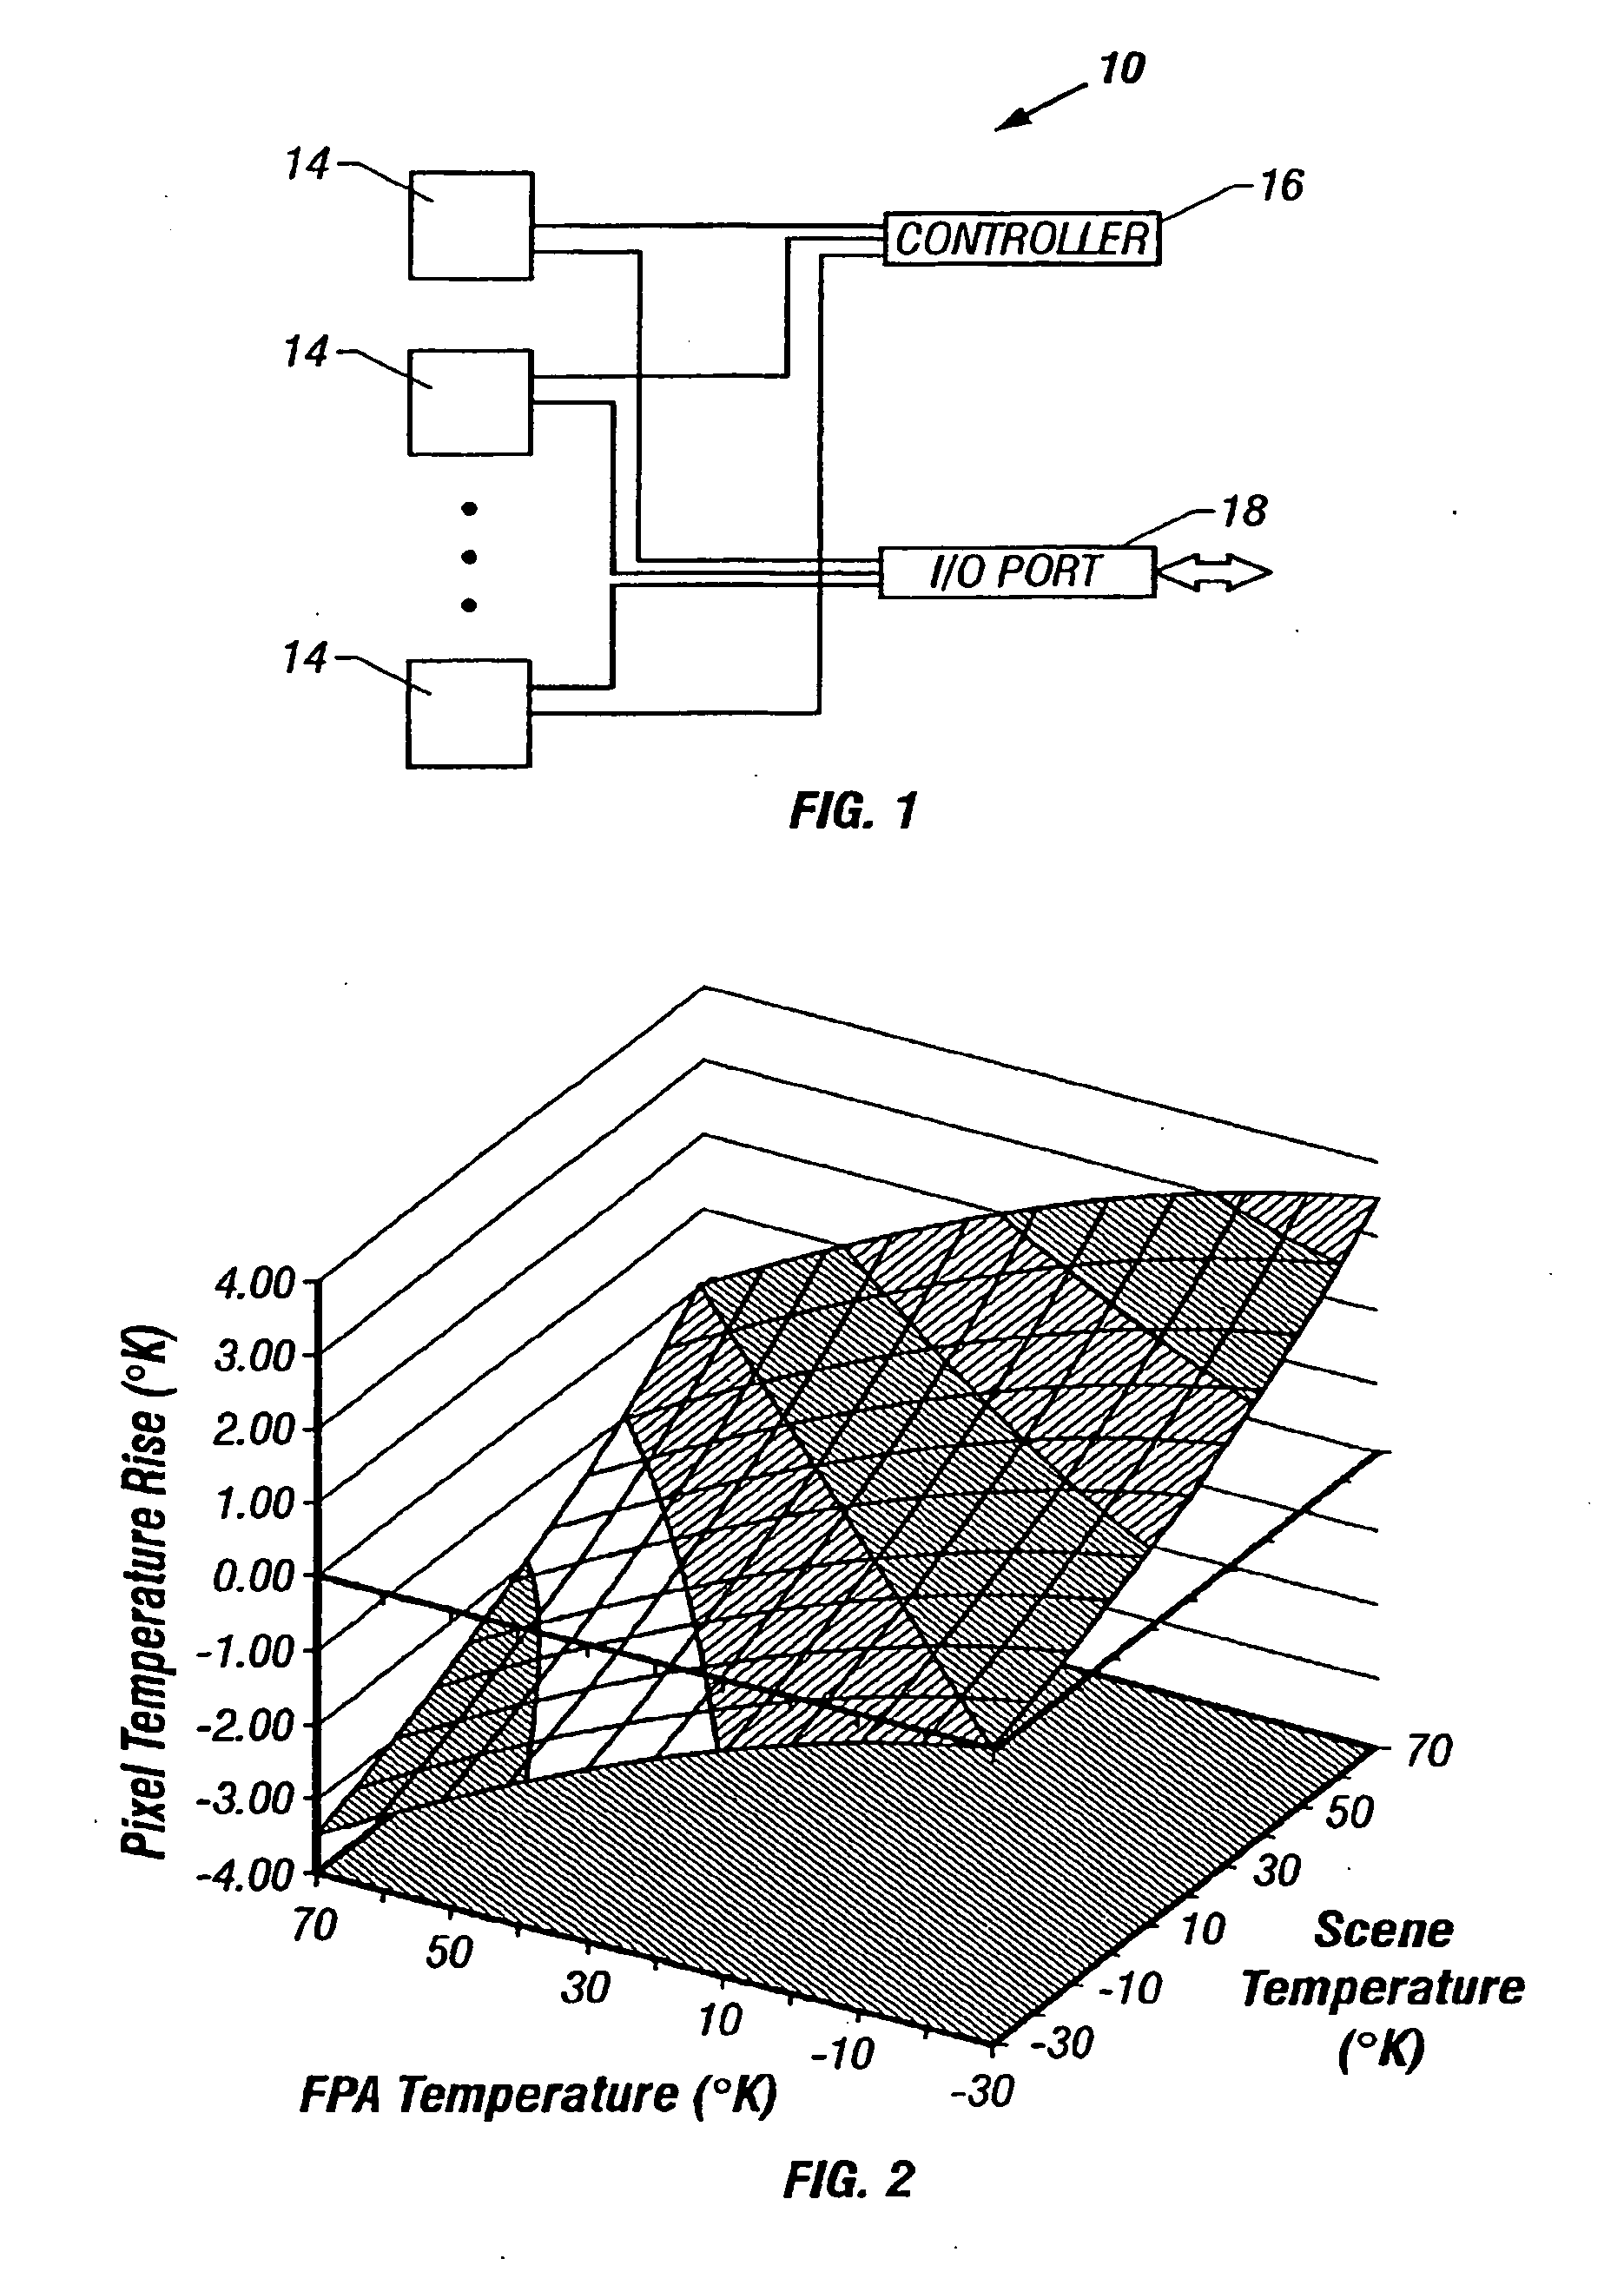 Imaging device with multiple fields of view incorporating memory-based temperature compensation of an uncooled focal plane array